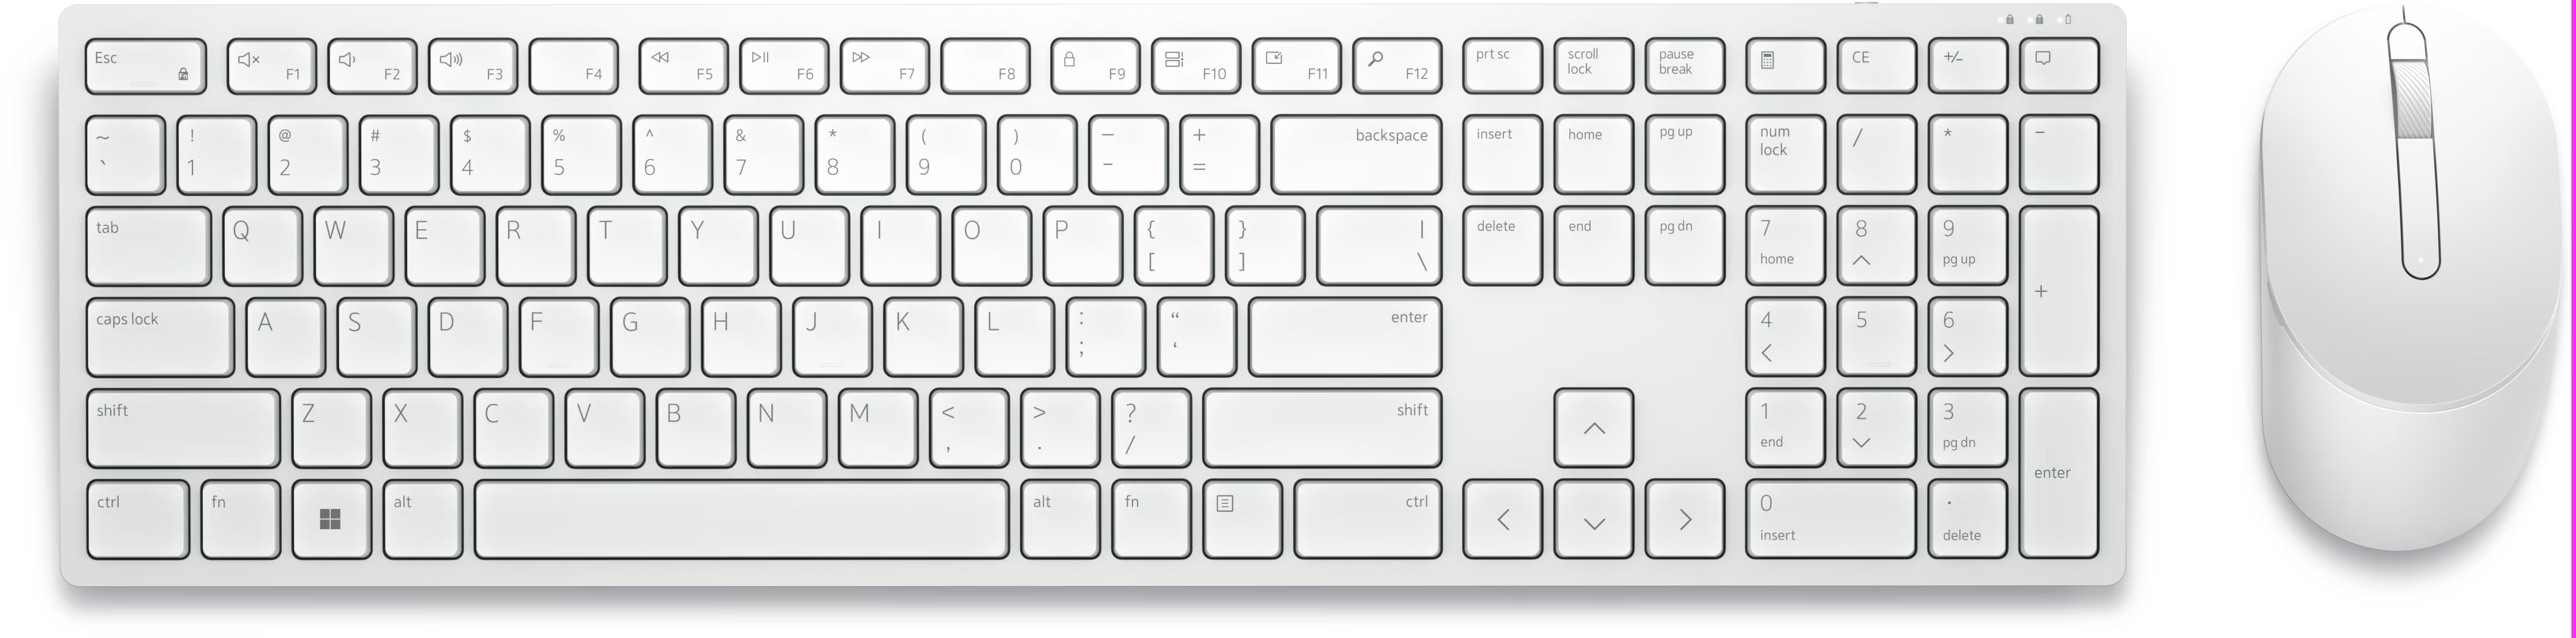 DELL Pro Wireless Keyboard and Mouse White - Albagame